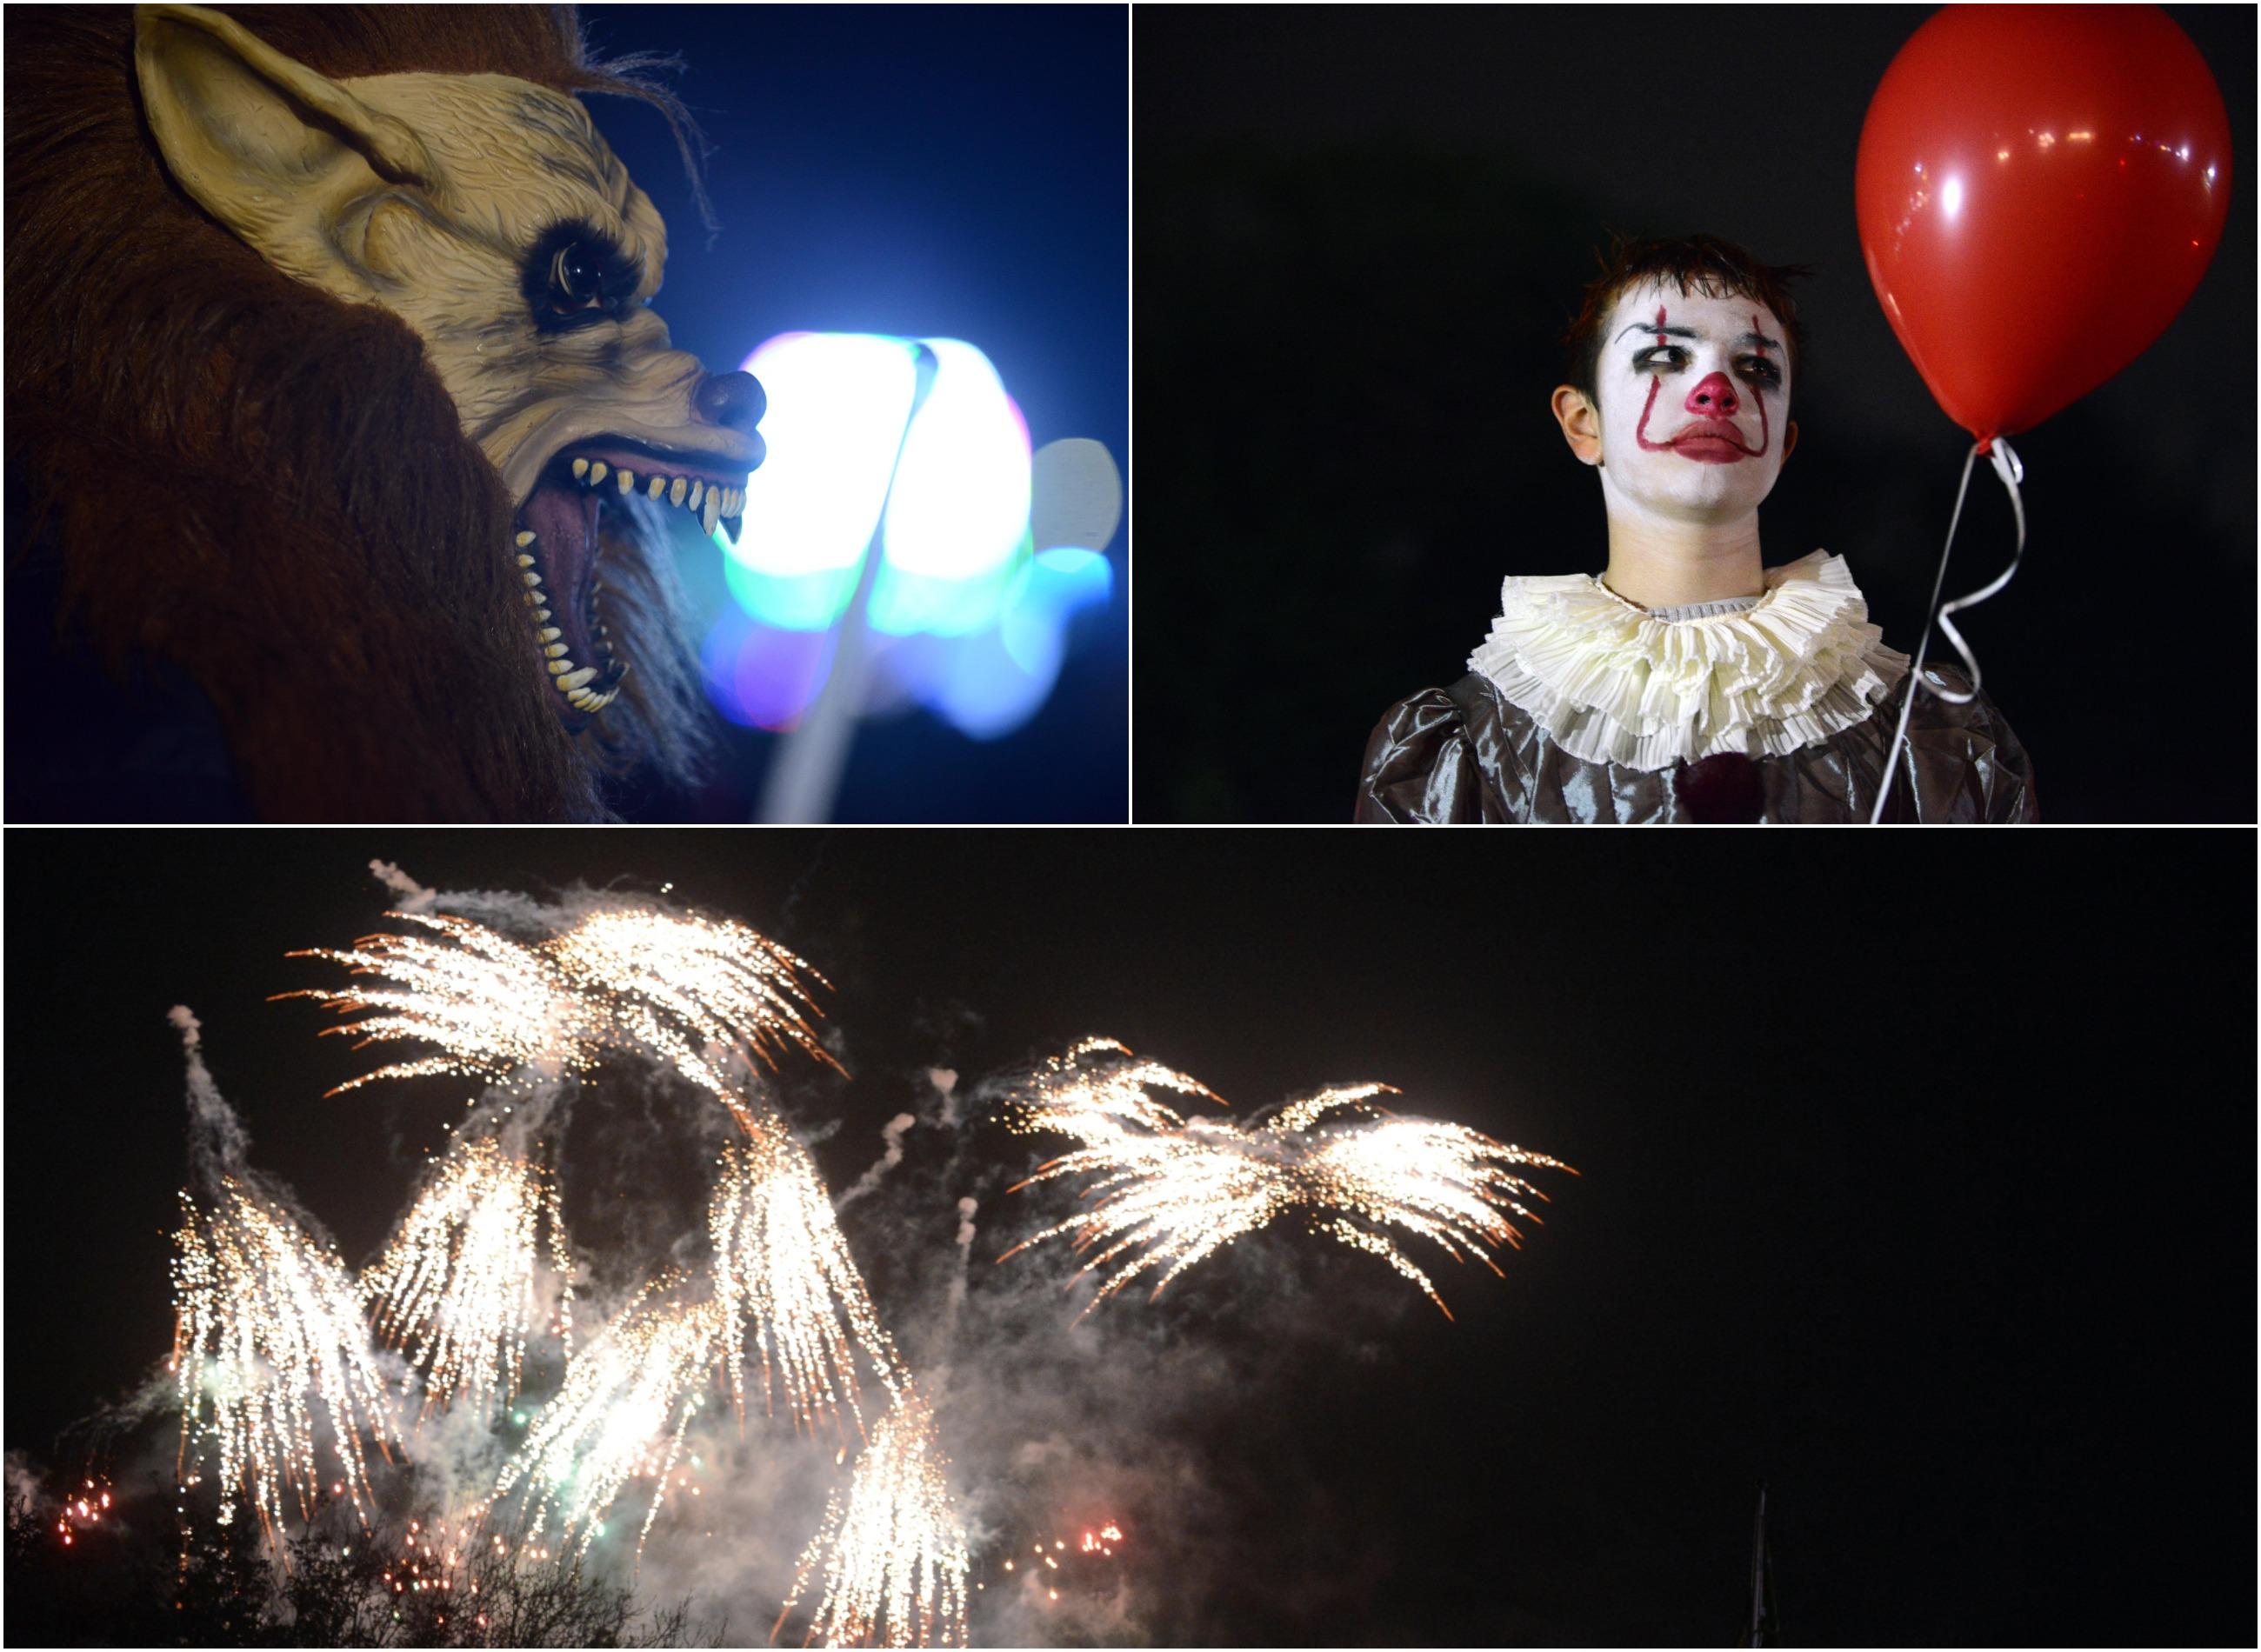 39 photos from the Sunderland Spooktacular and Fireworks Display at